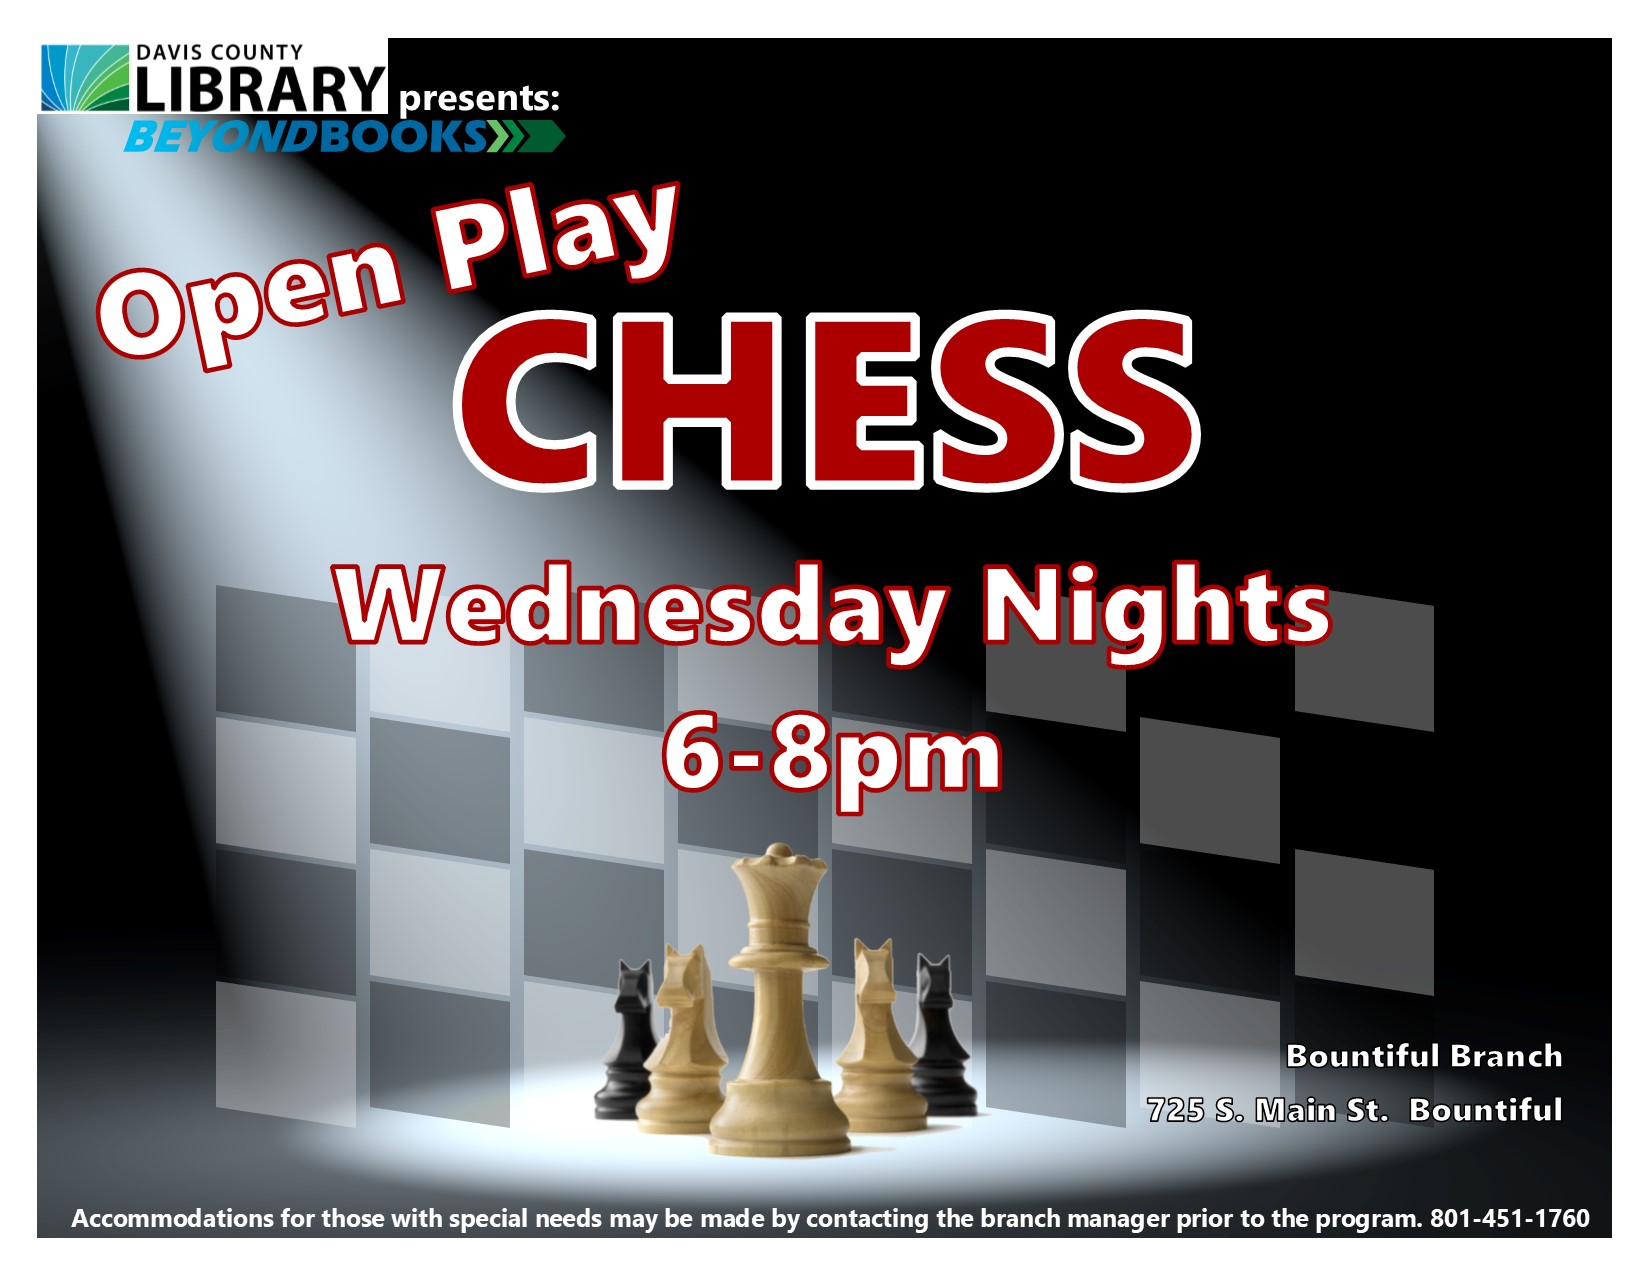 Open Play Chess on Wednesdays 6-8pm Flier